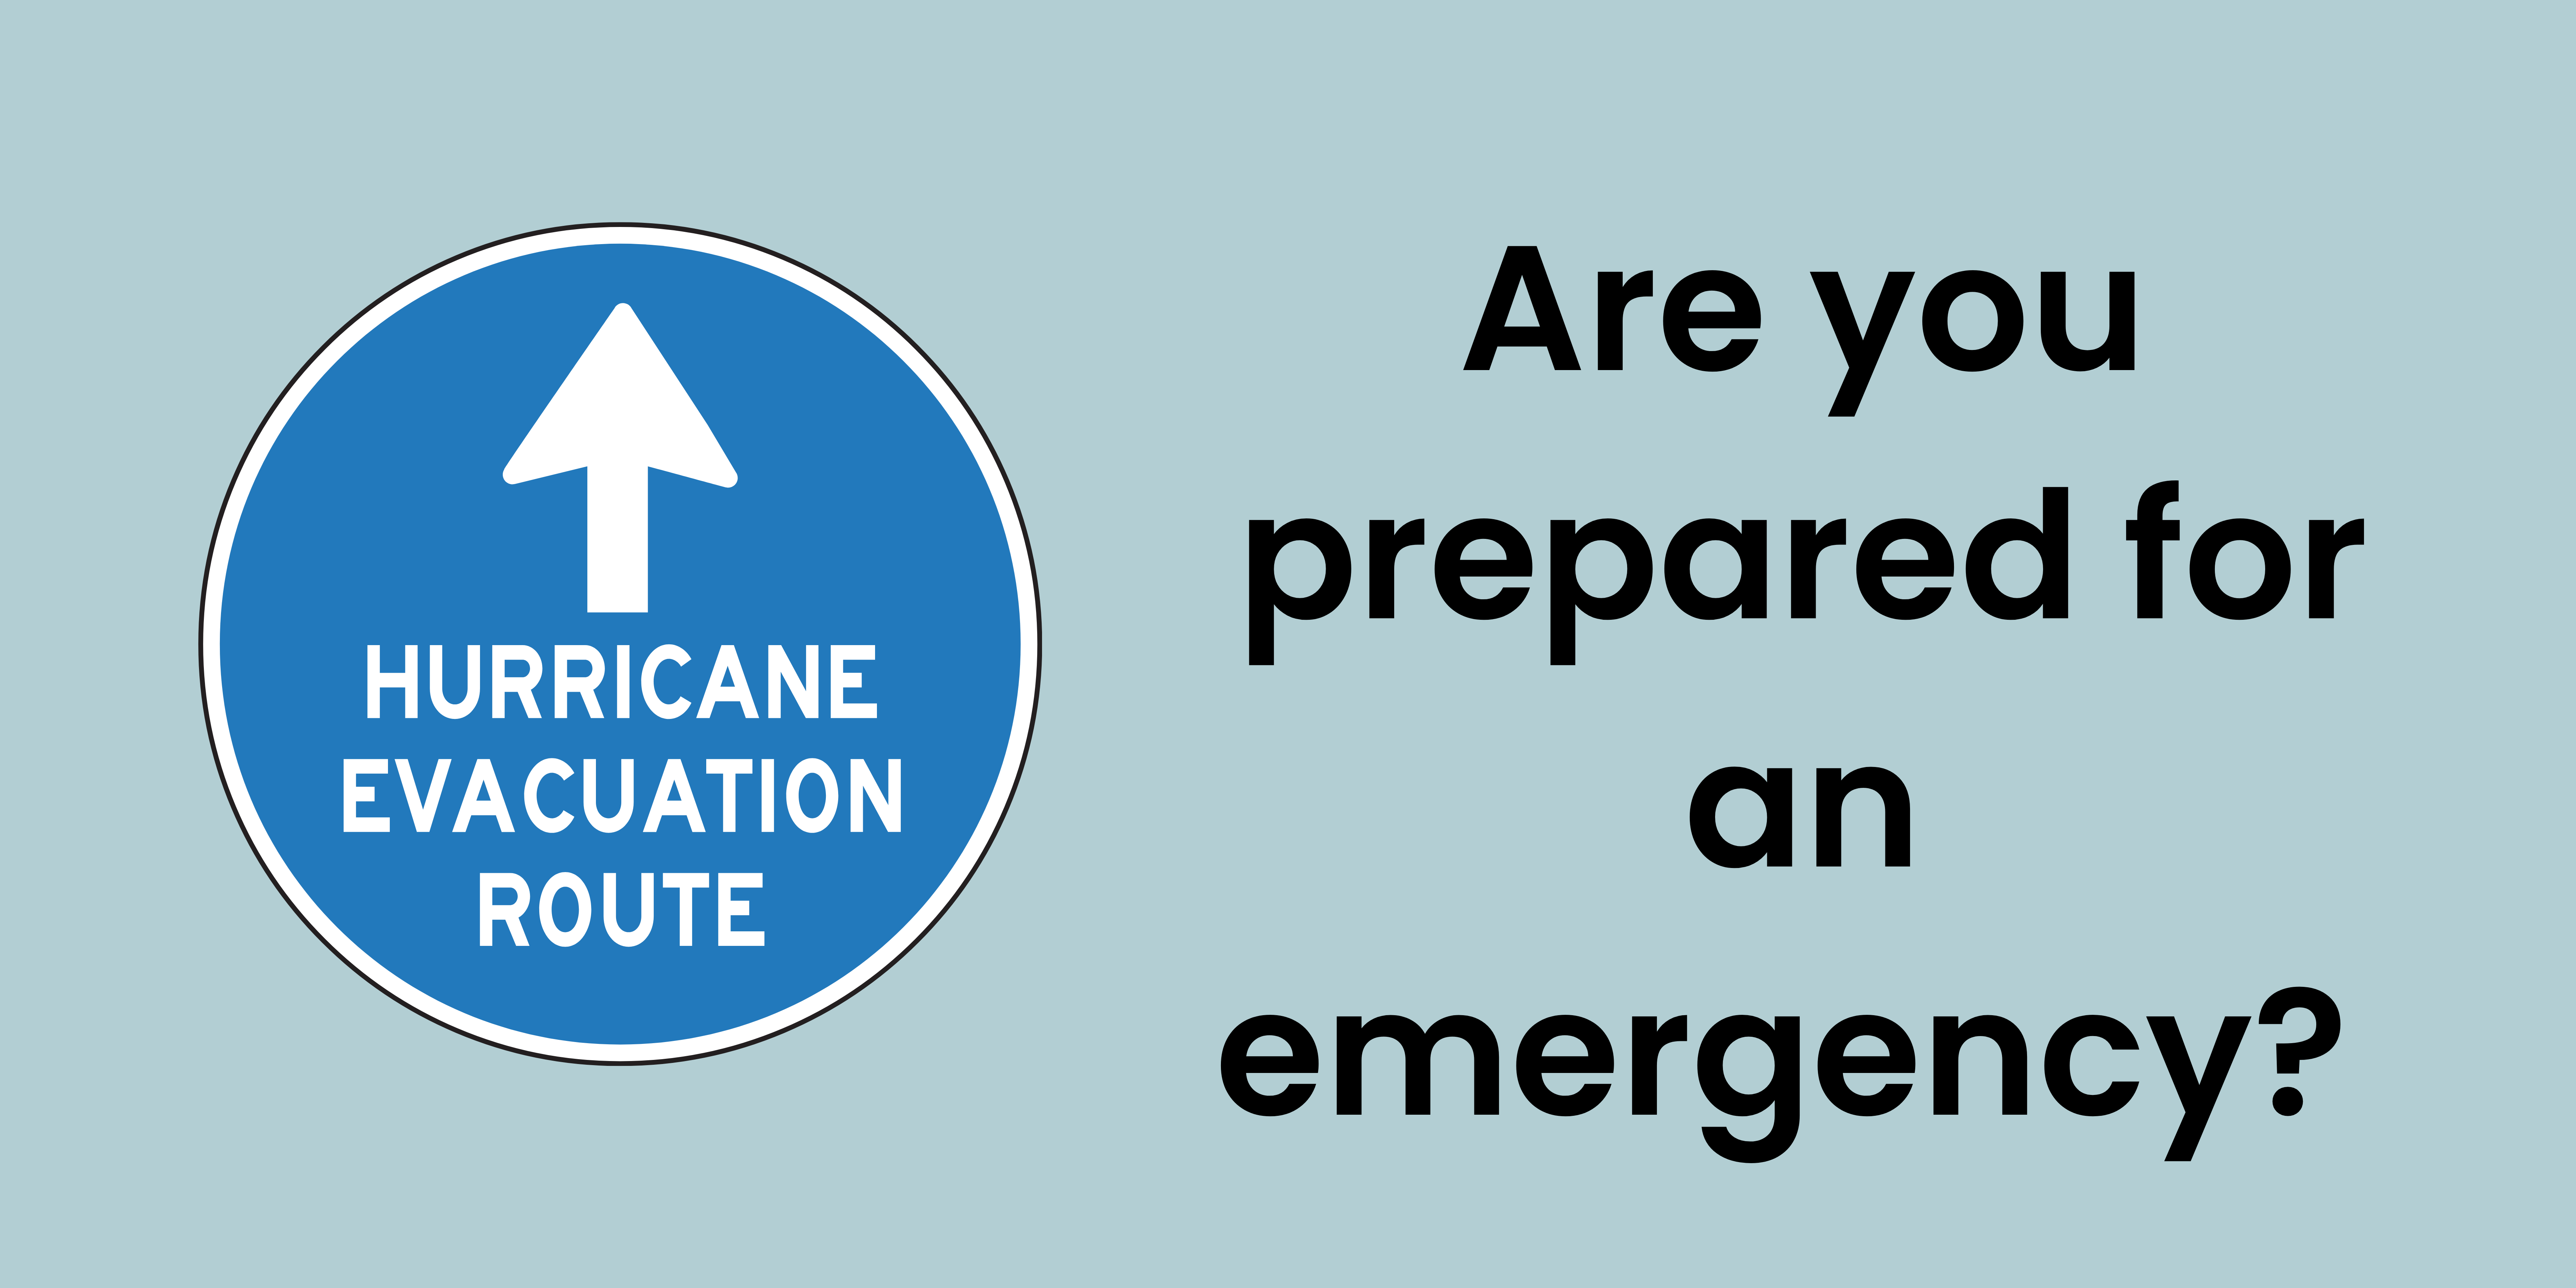 blue background with hurricane evacuation route sign and words that say, "are you prepared for an emergency?"